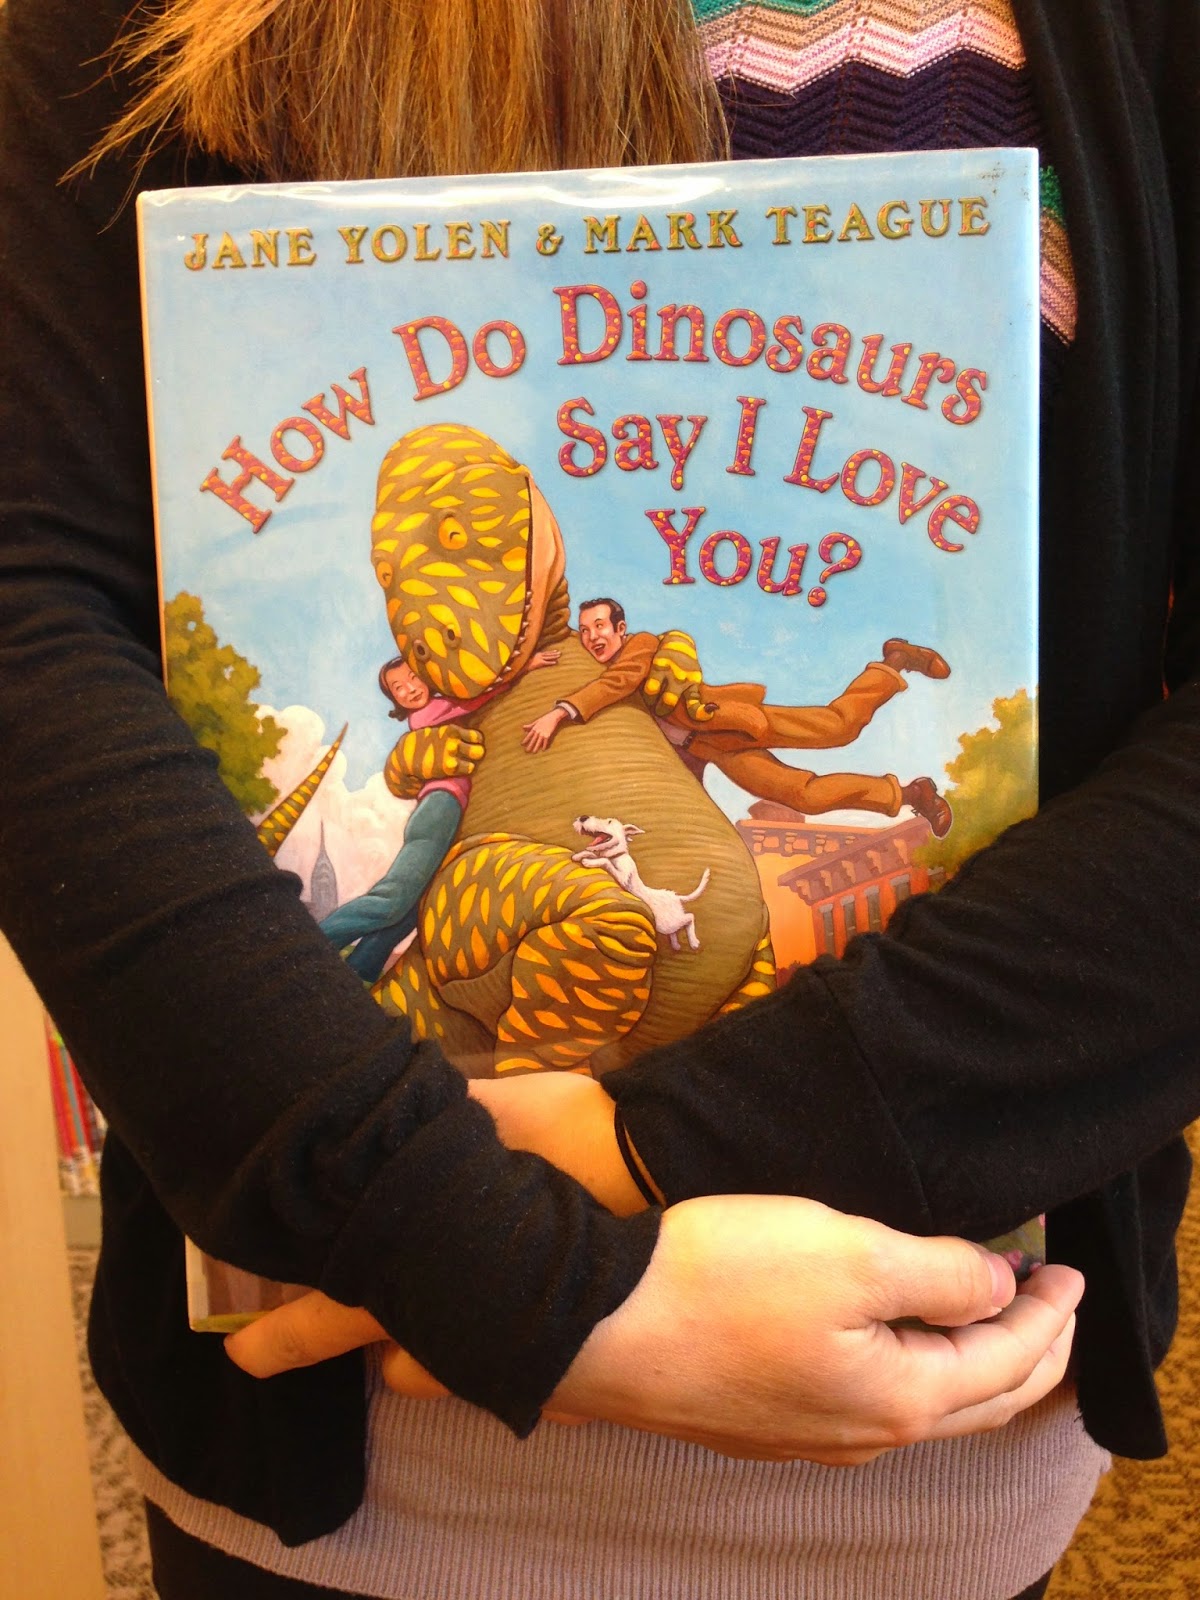 http://catalog.syossetlibrary.org/search?/thow+do+dinosaurs/thow+do+dinosaurs/1%2C14%2C17%2CB/frameset&FF=thow+do+dinosaurs+say+i+love+you&1%2C1%2C